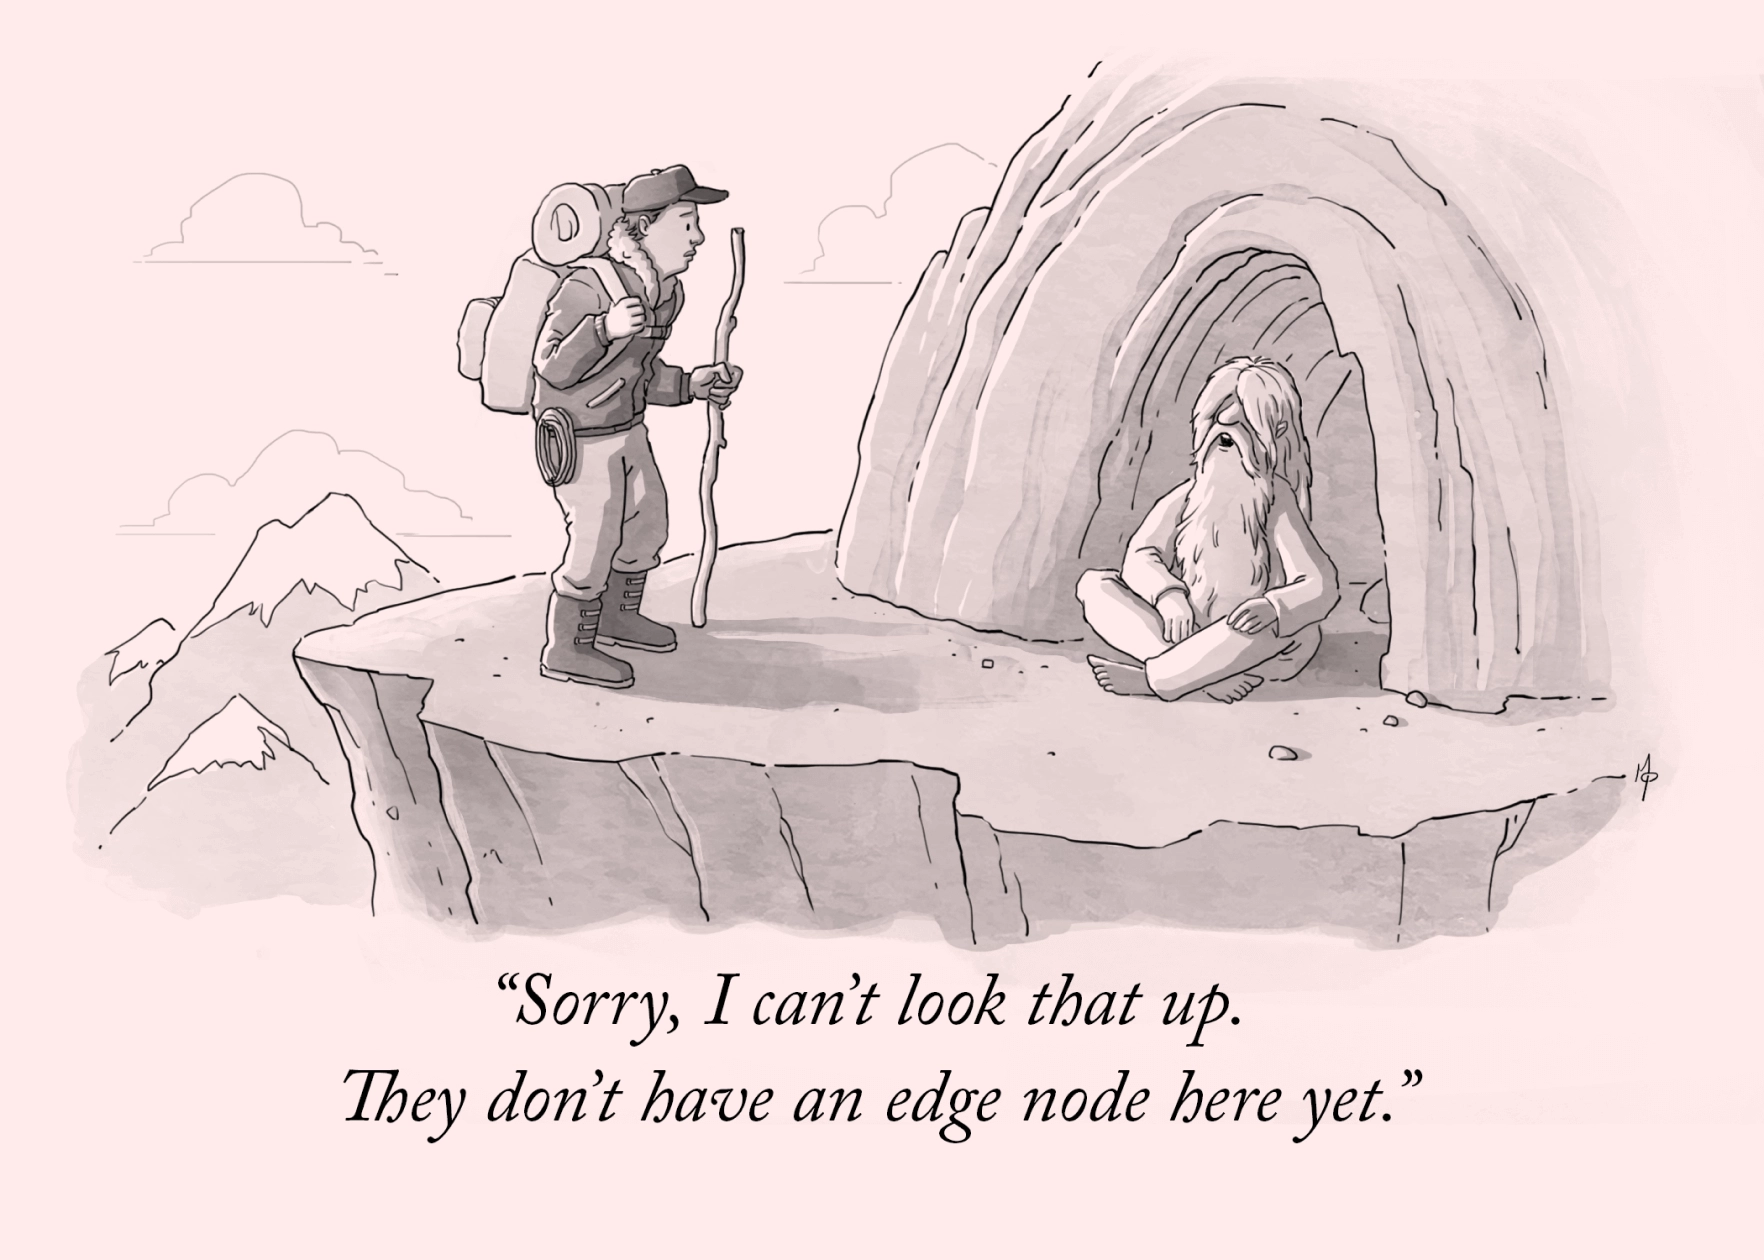 A cartoon-style illustration of a lost-looking hiker man who brings a large backpack, sleeping bag, and rope; wears high boots; and holds a long stick. He is visiting a cave high up in the mountain to ask a white-haired, bearded man who lives there for direction. The caveman answered: Sorry, I can't look that up. They don't have an edge node here yet.